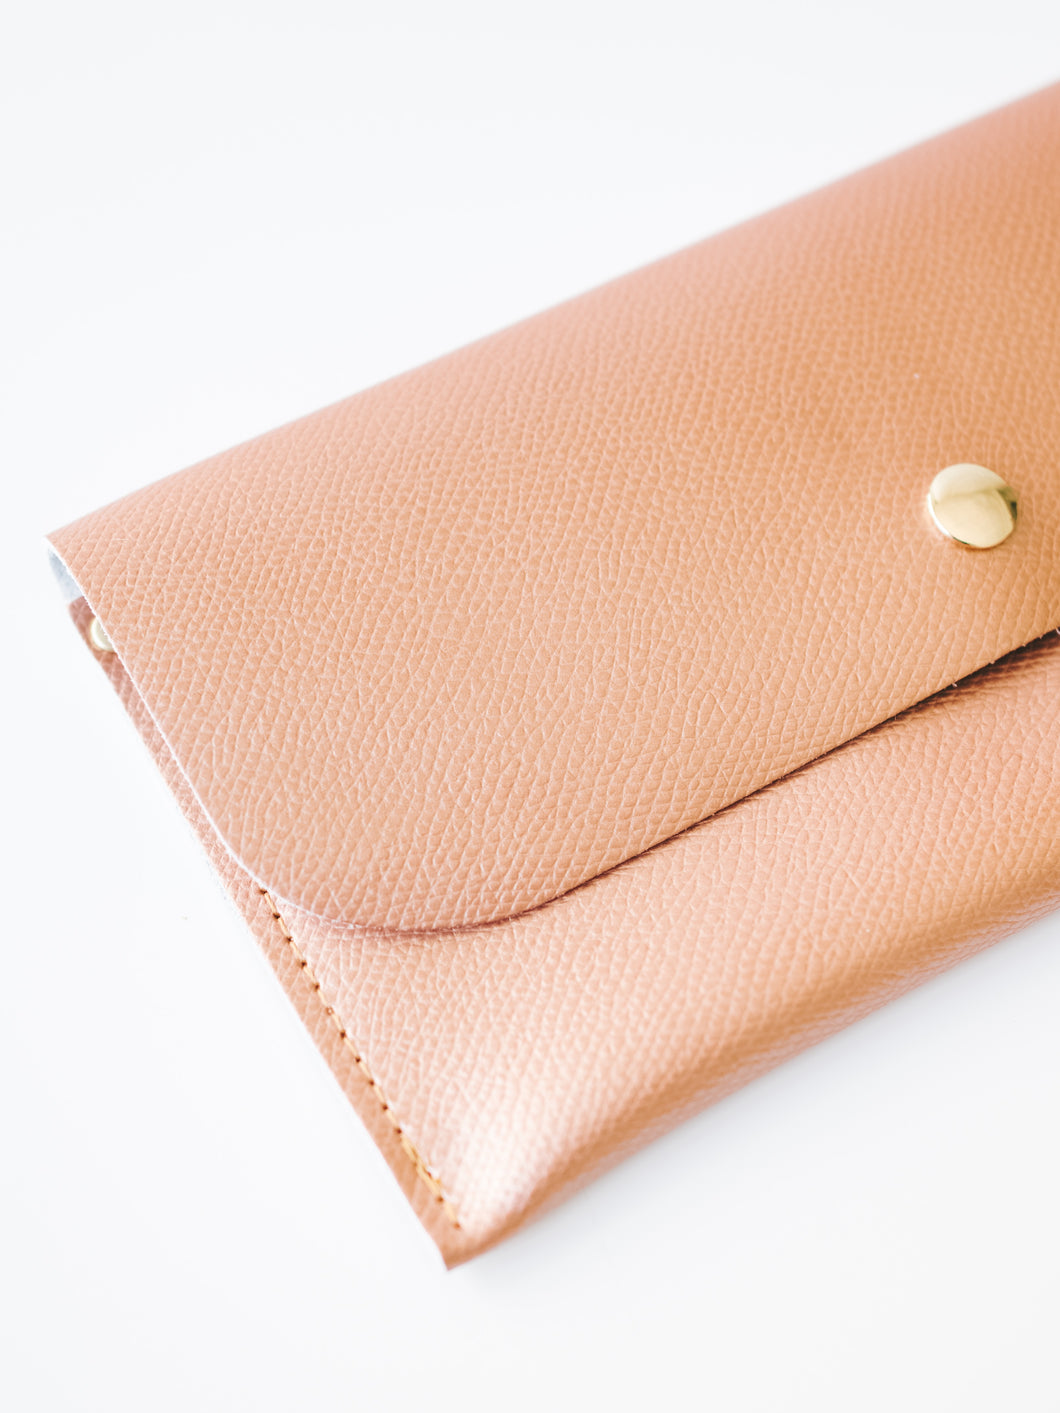 OVERSIZED WALLET - ROSE GOLD LEATHER